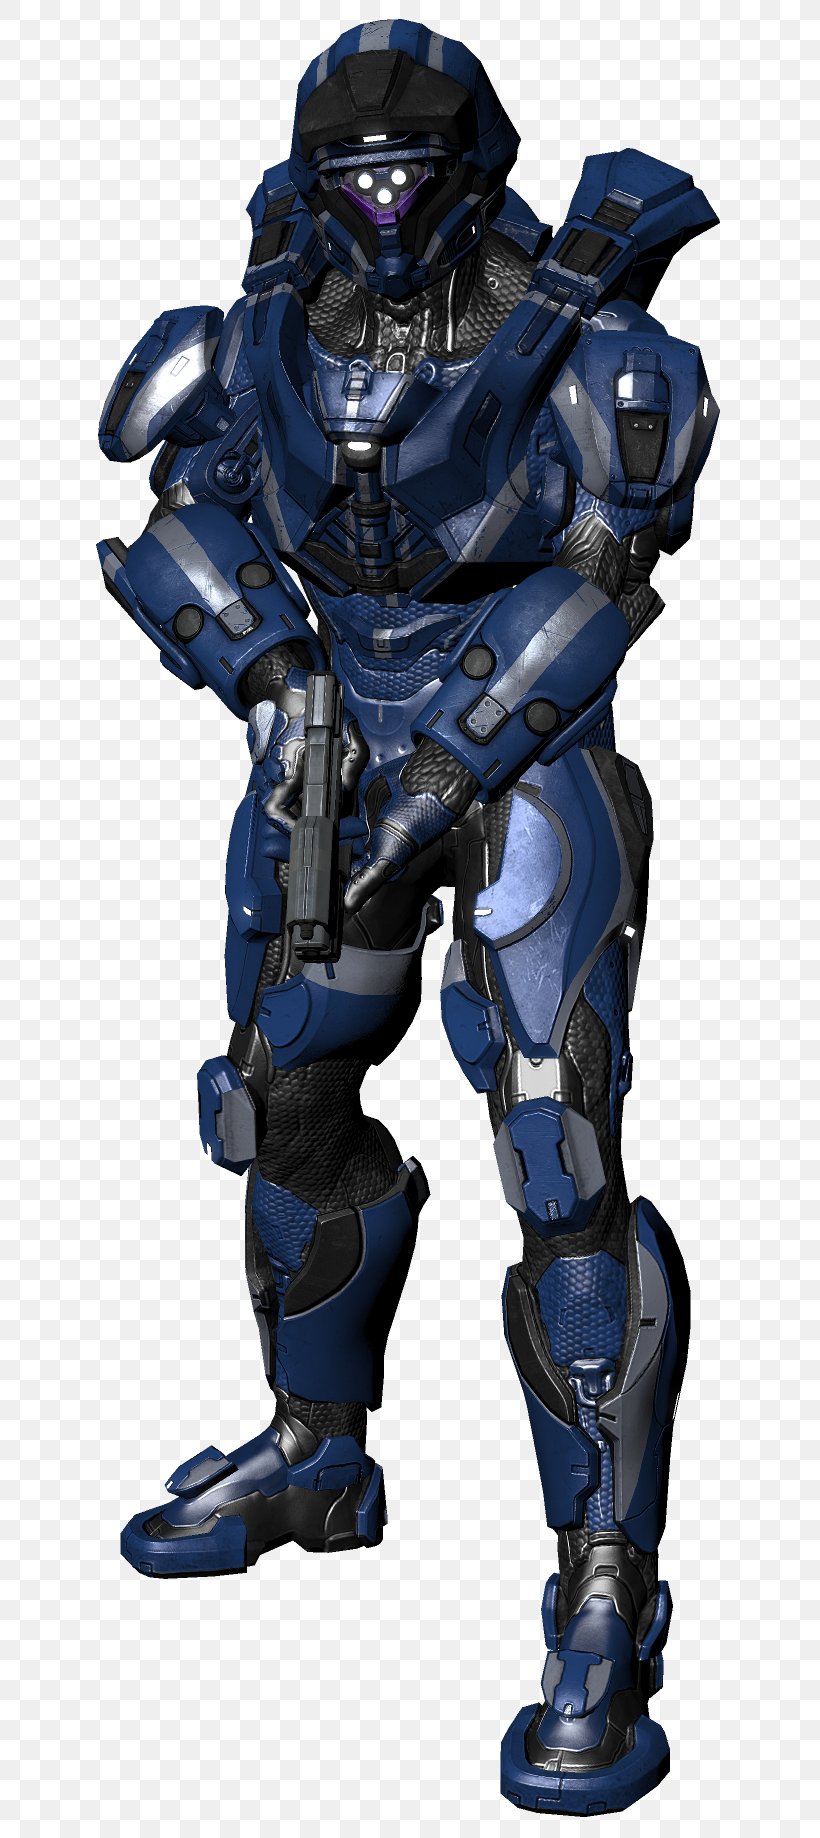 Halo 4 Halo: Reach Halo: Spartan Assault Halo 5: Guardians Halo 3, PNG, 700x1838px, 343 Industries, Halo 4, Action Figure, Armour, Figurine Download Free